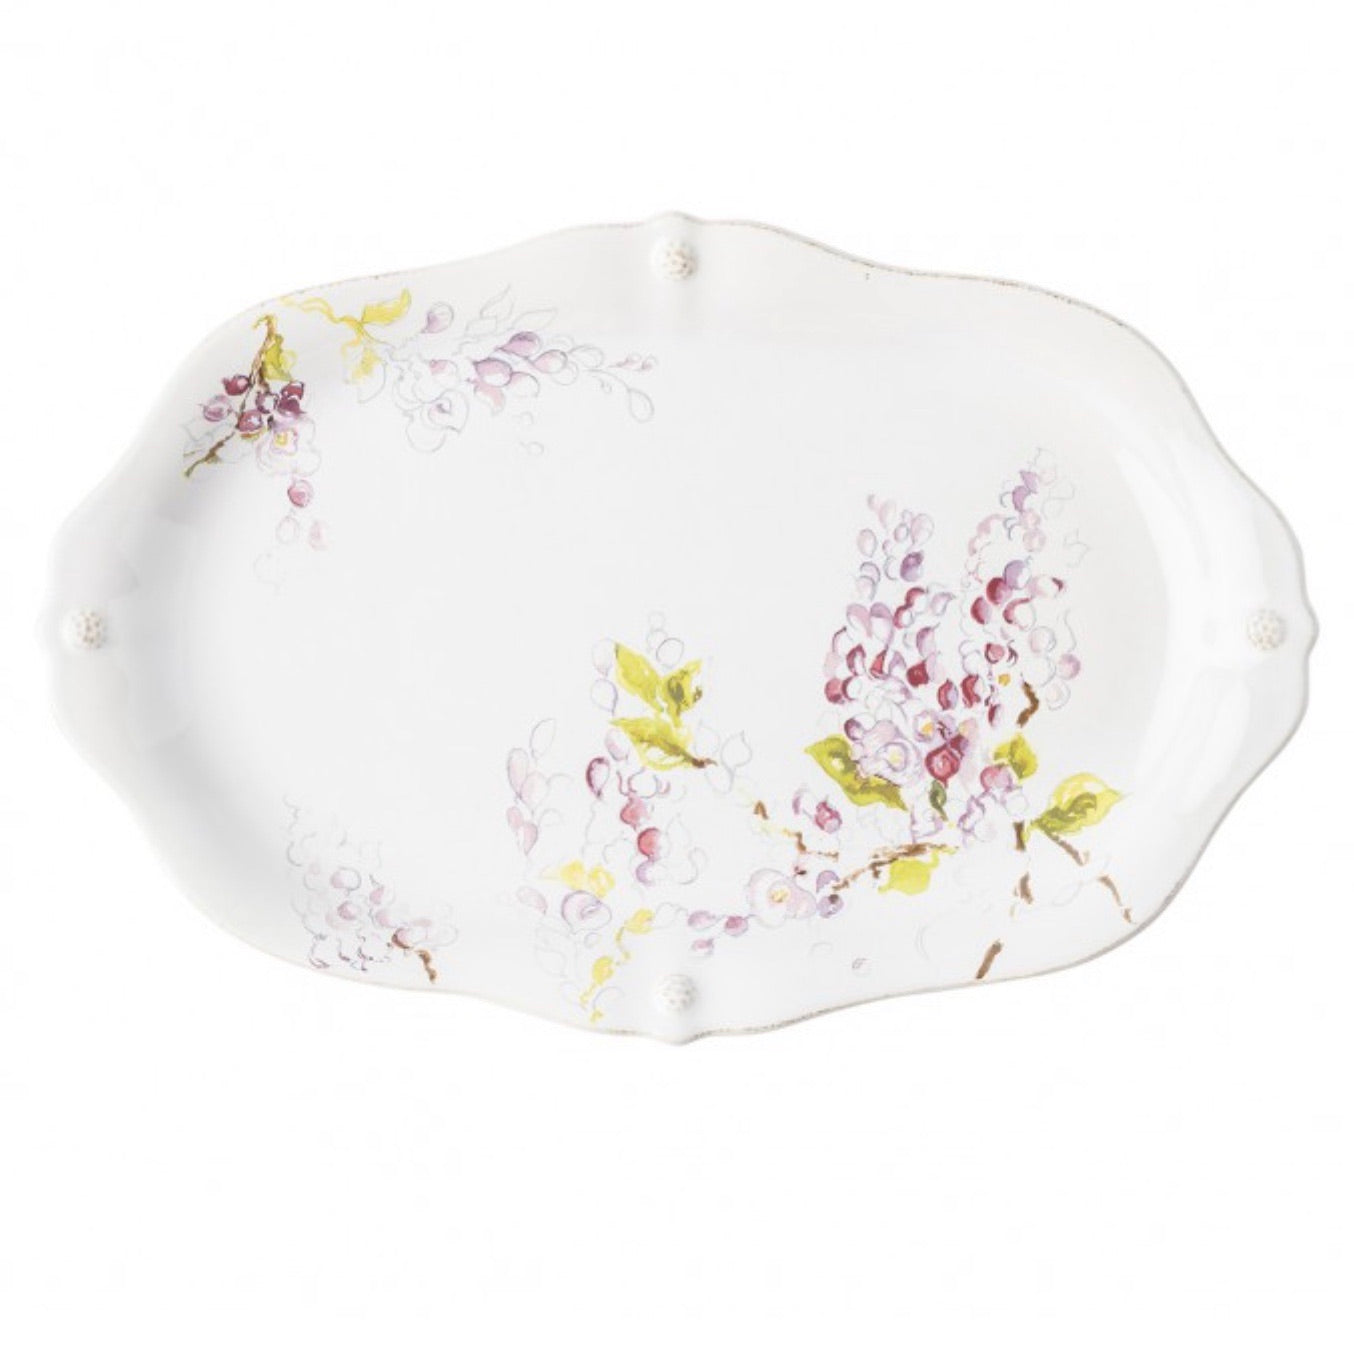 Berry & Thread Floral Sketch Wisteria Platter